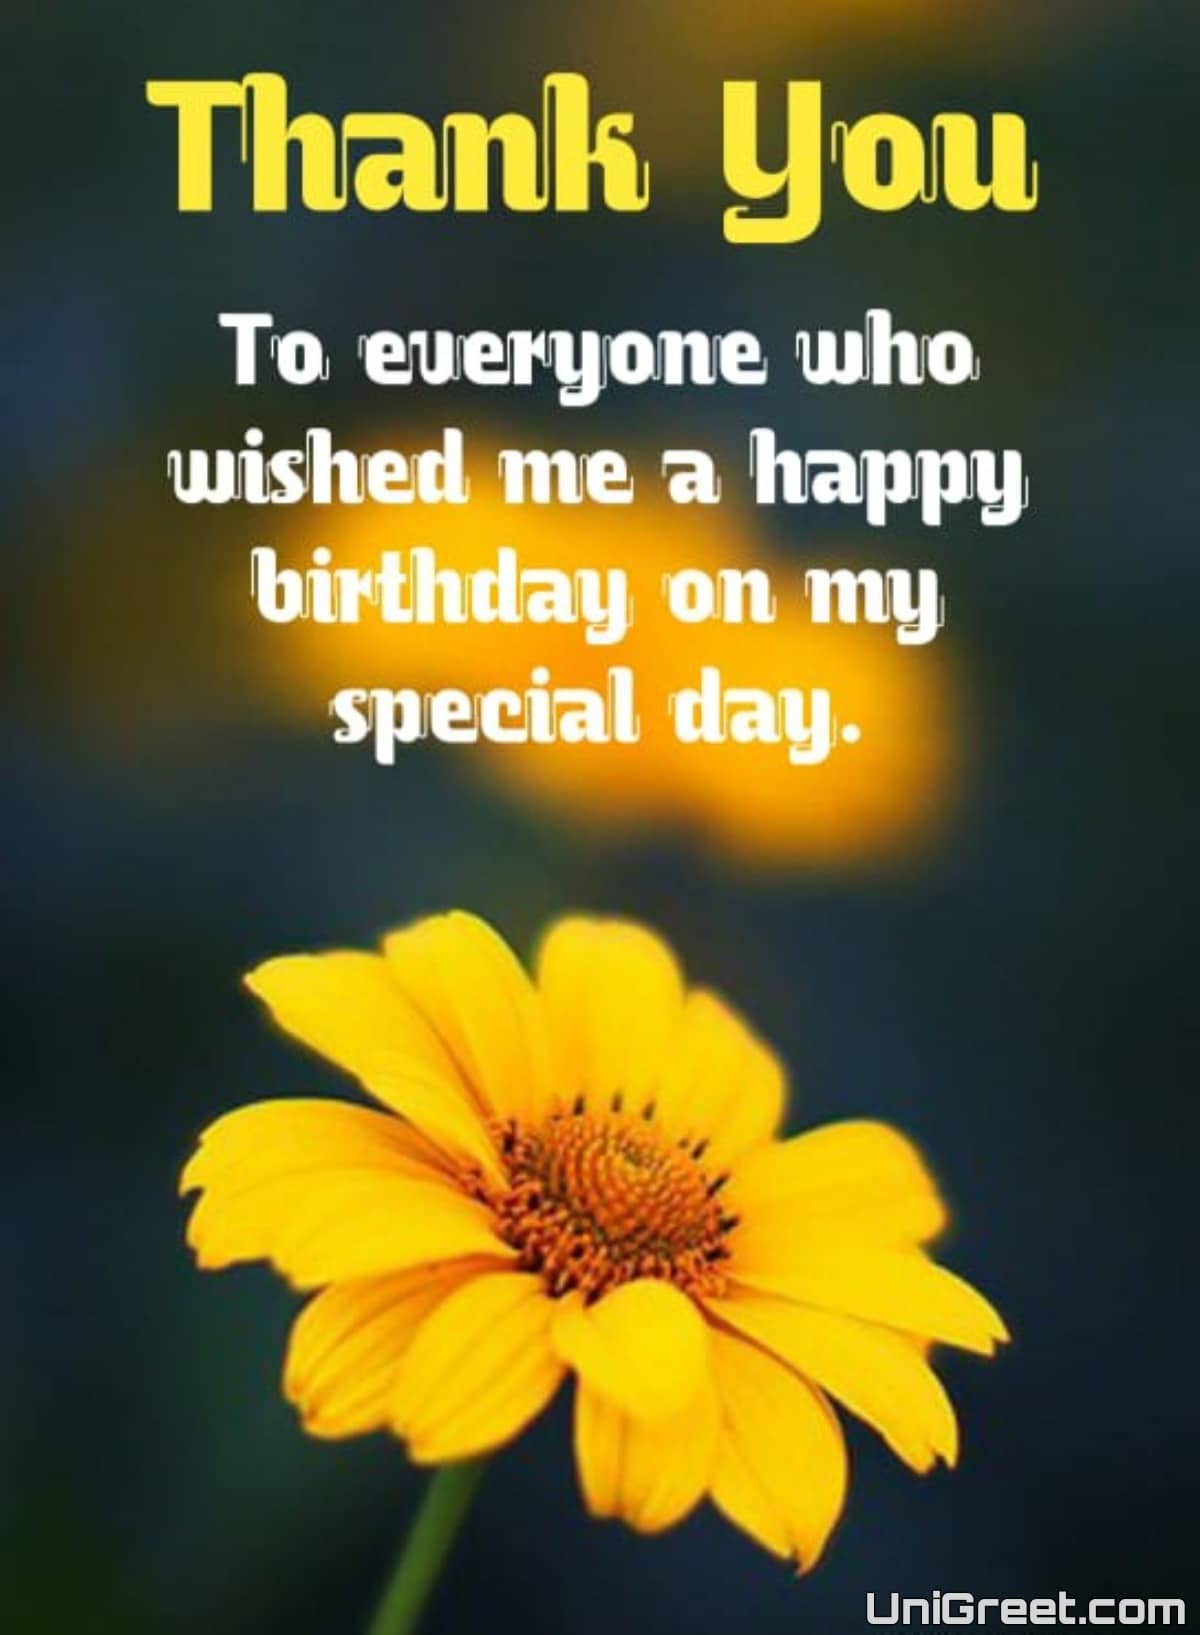 50 Best 👌 Thanks For Birthday Wishes Images | Thank You Messages For Birthday  Wishes